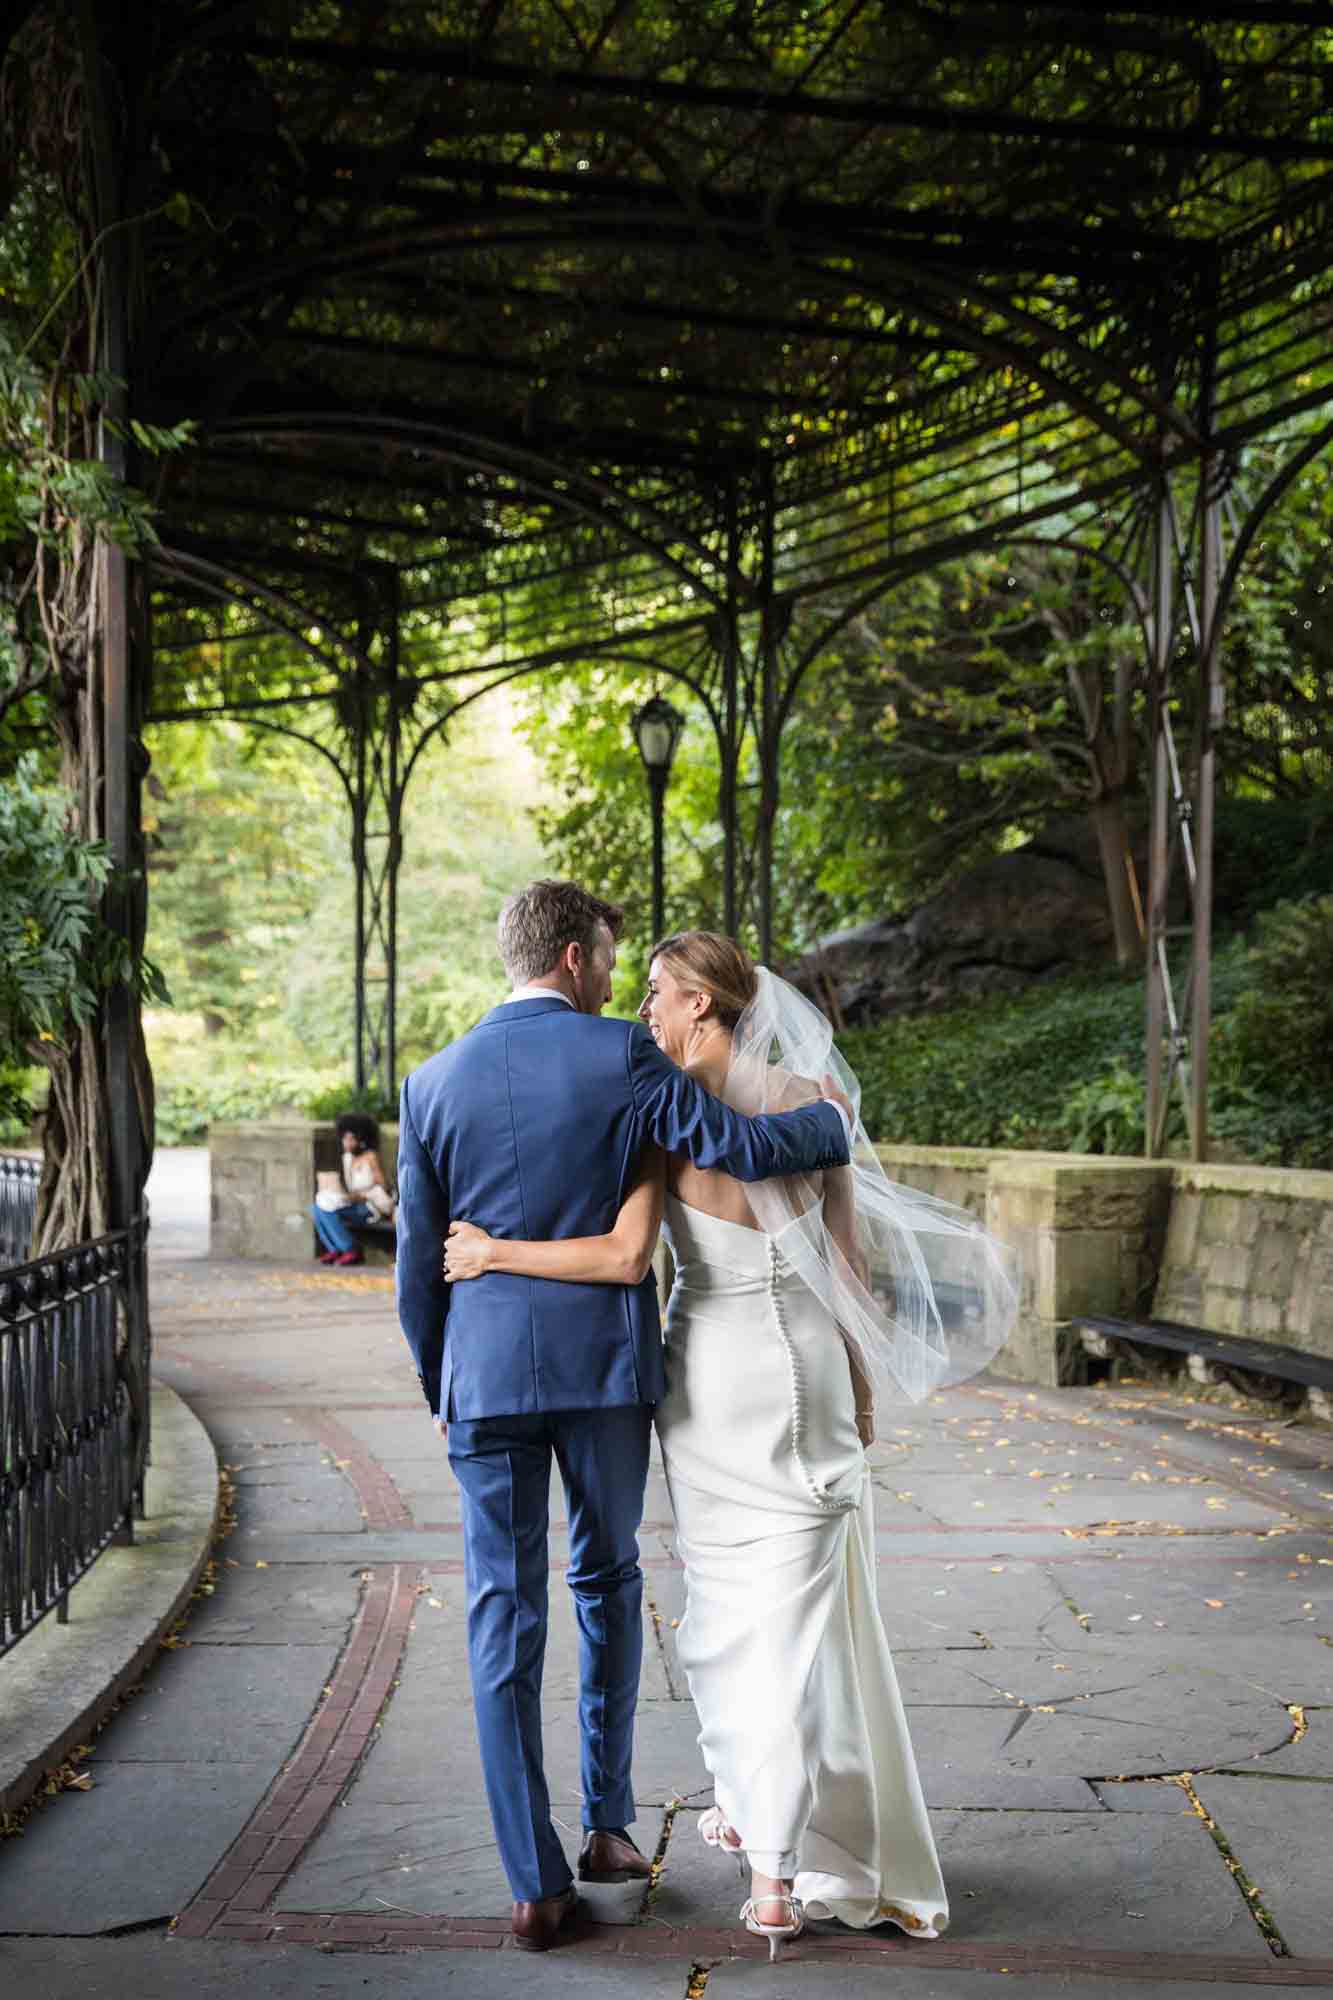 Bride and groom walking on Wisteria Terrace with arms around each other during a Conservatory Garden wedding in Central Park